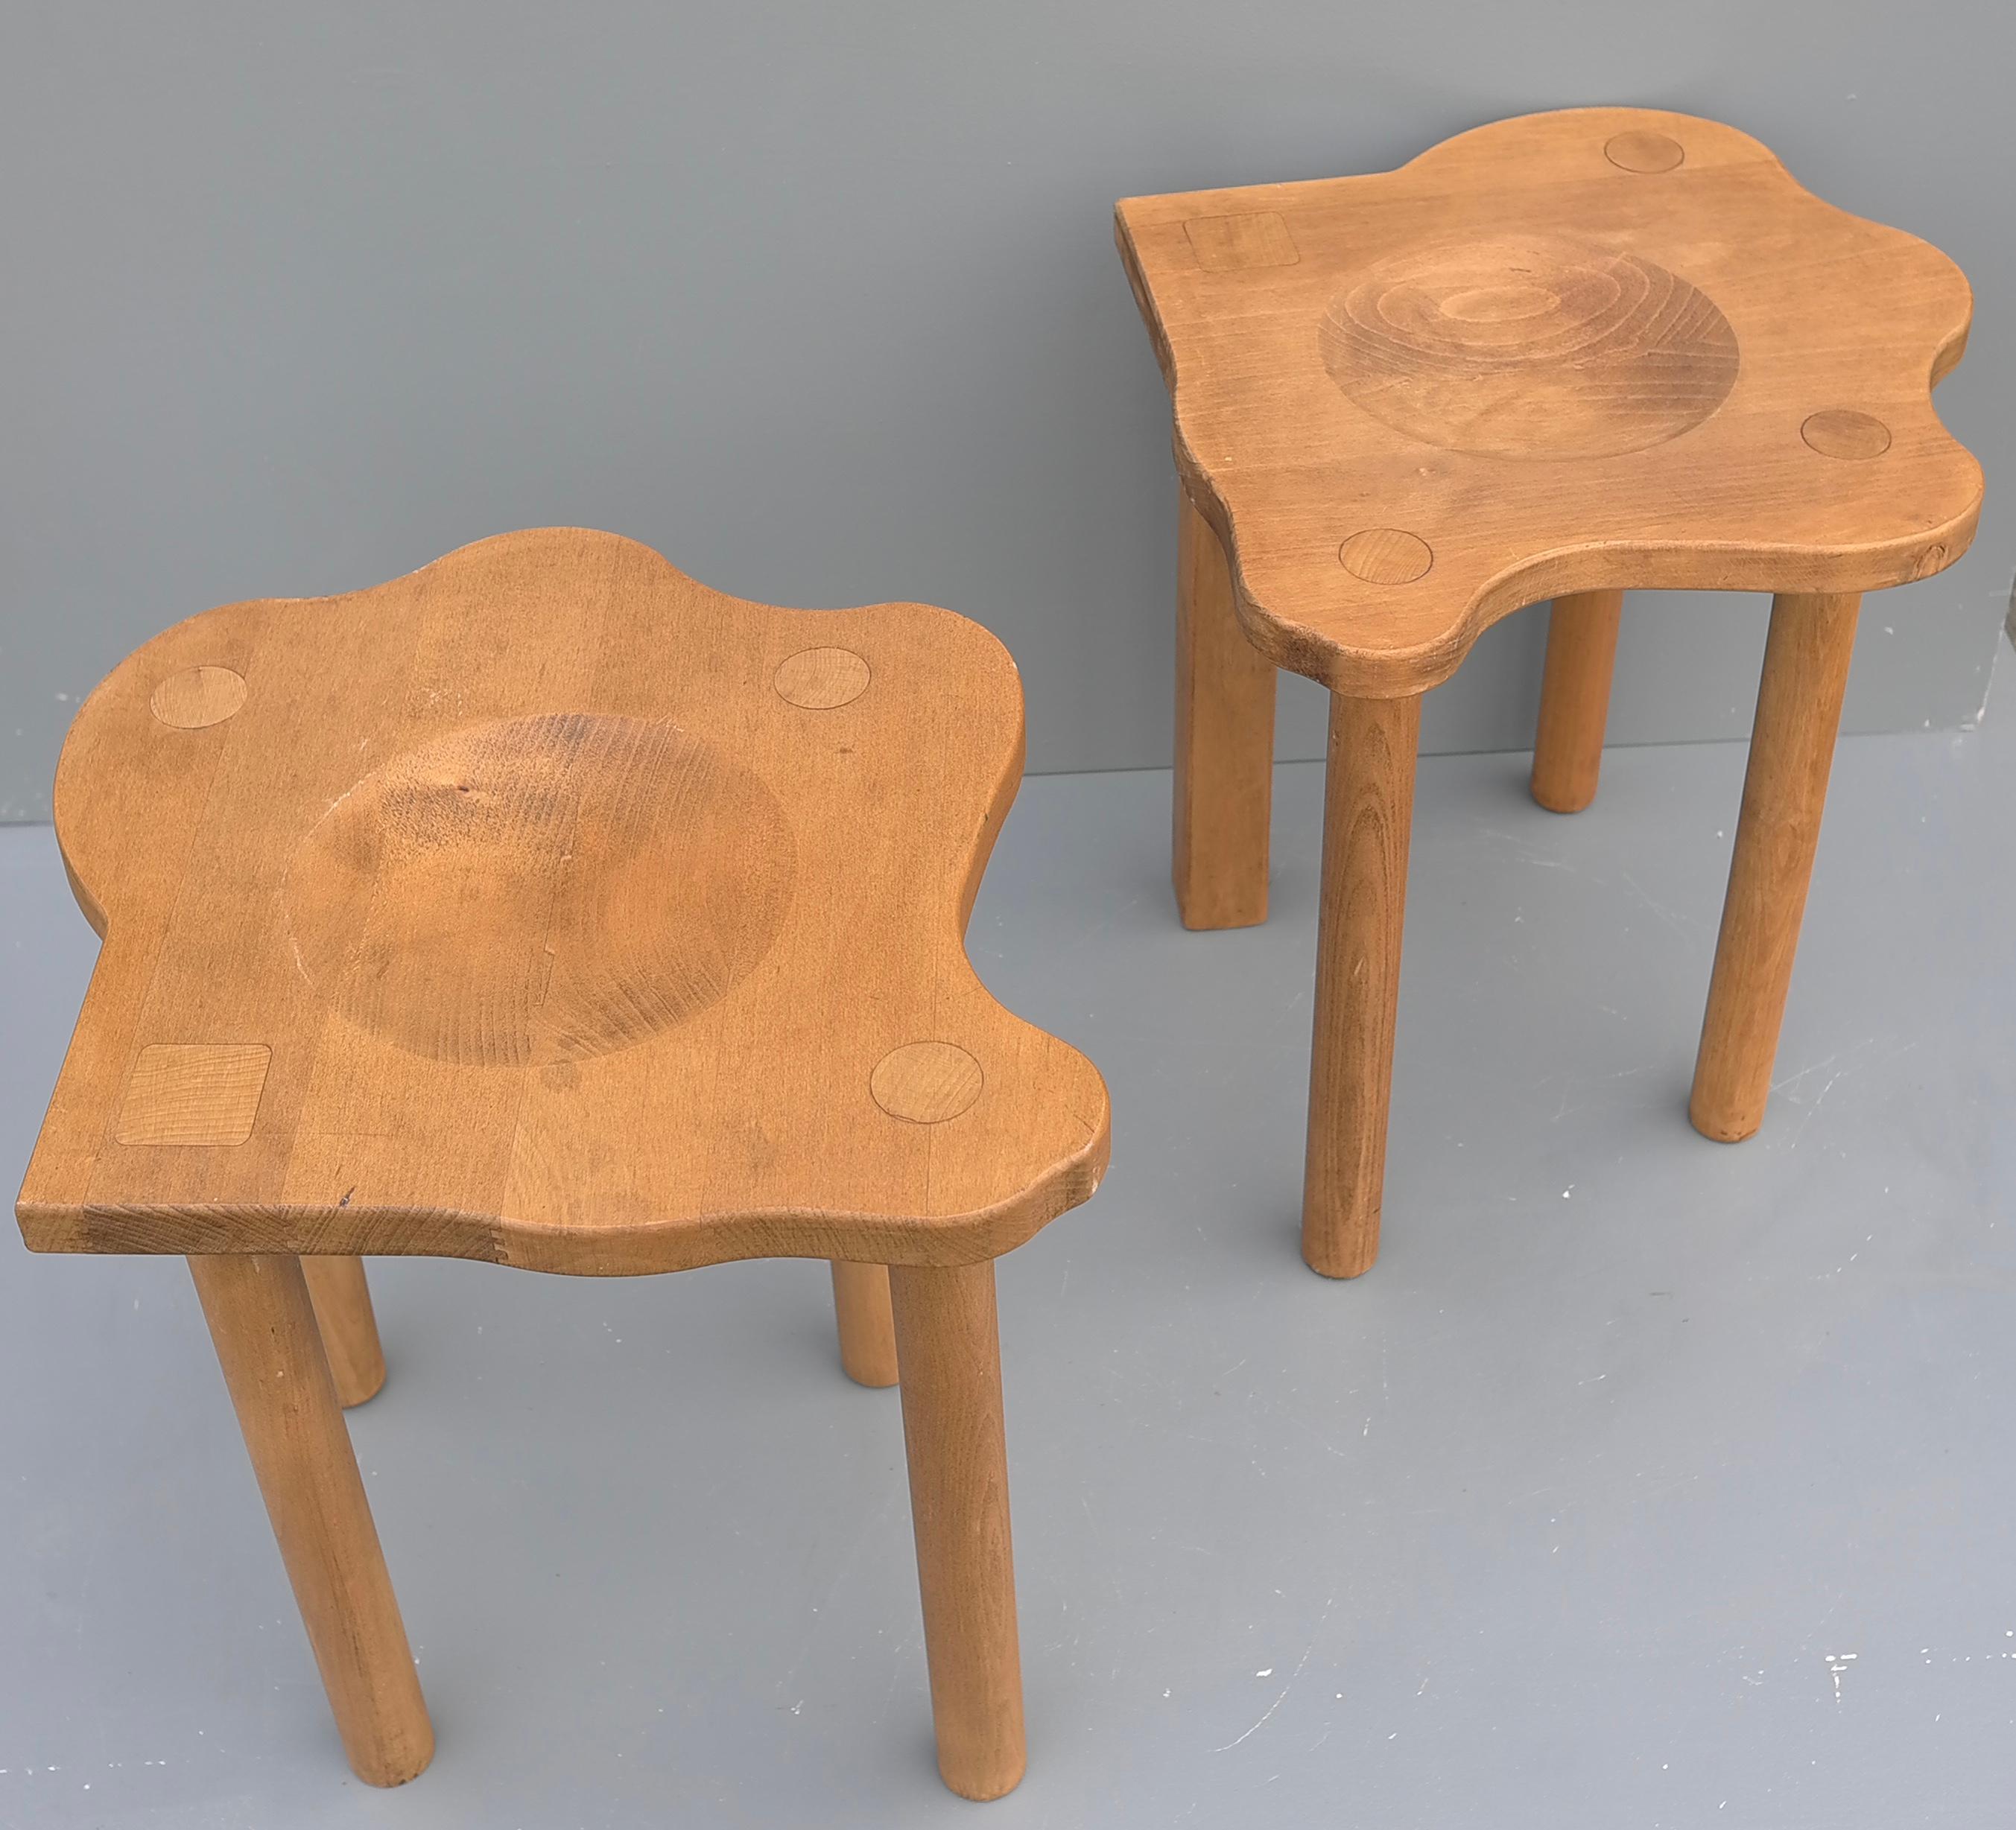 Pair of German postmodern oak work stools by E.R.A. Herbst.
Signed, numbered and bearing the editor’s stamp
Creation date: circa 1989.